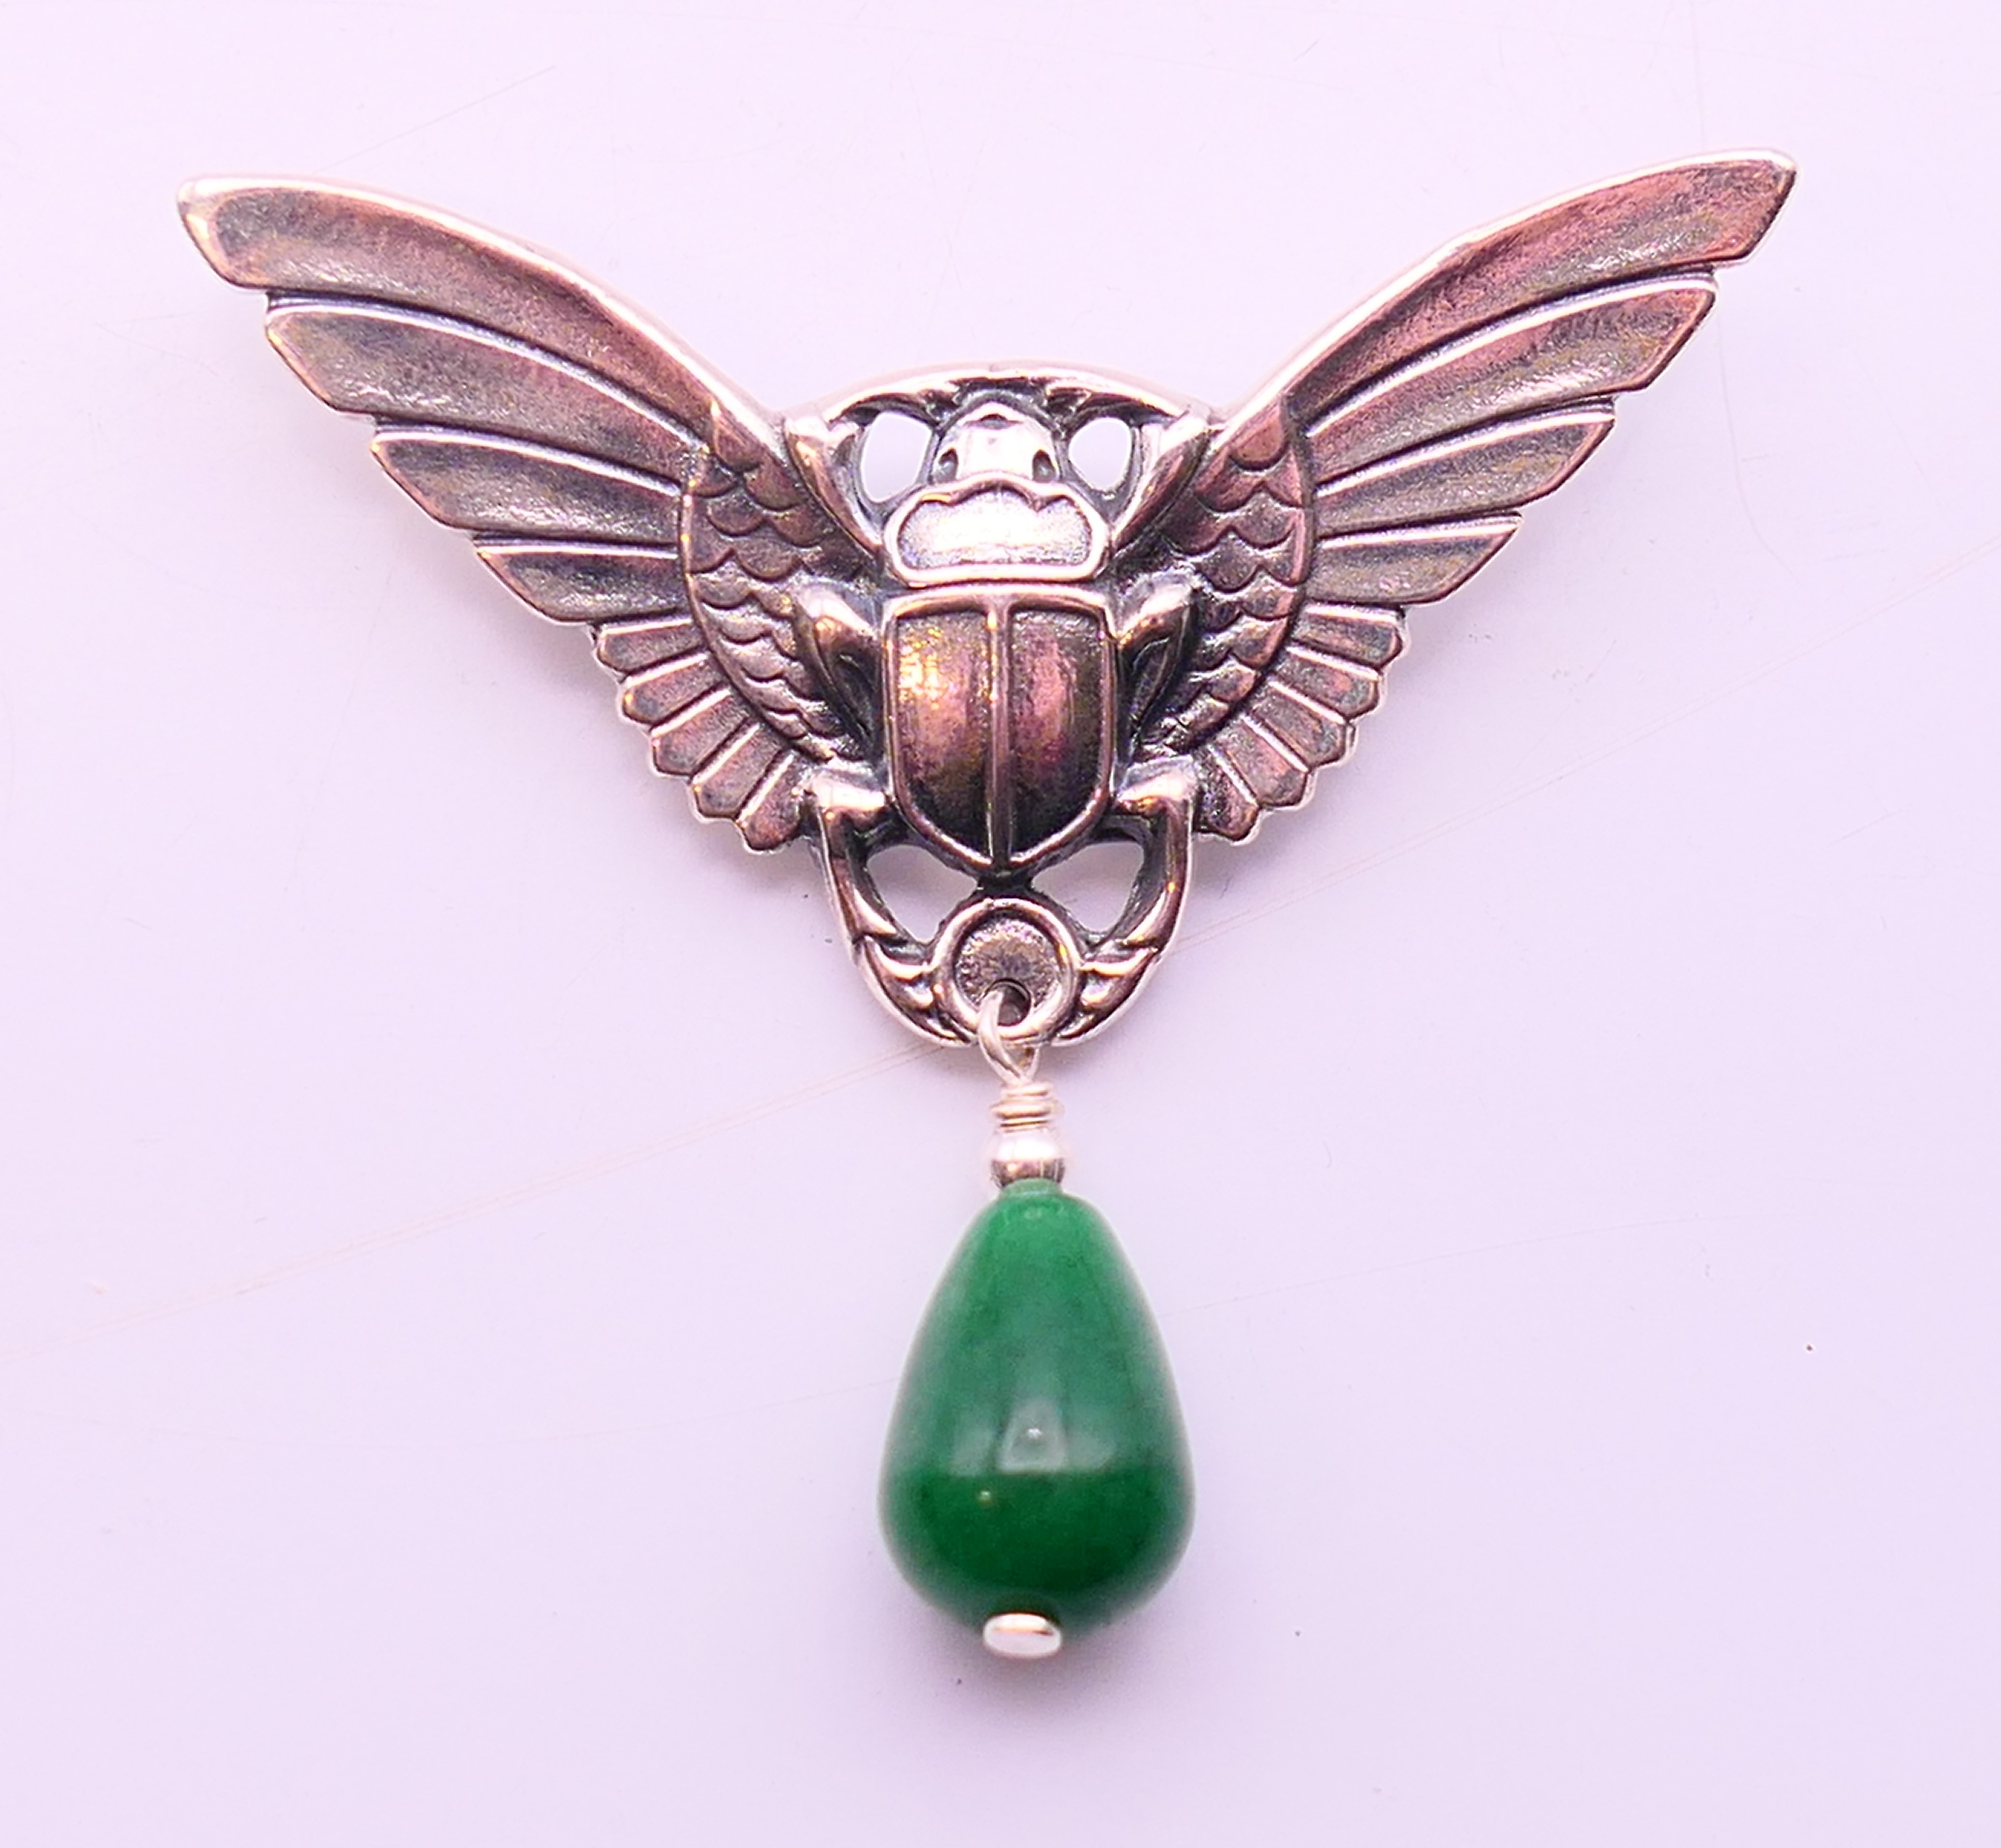 A silver and jade brooch in the form of a winged scarab beetle. 5 cm high x 5.5 cm wide.